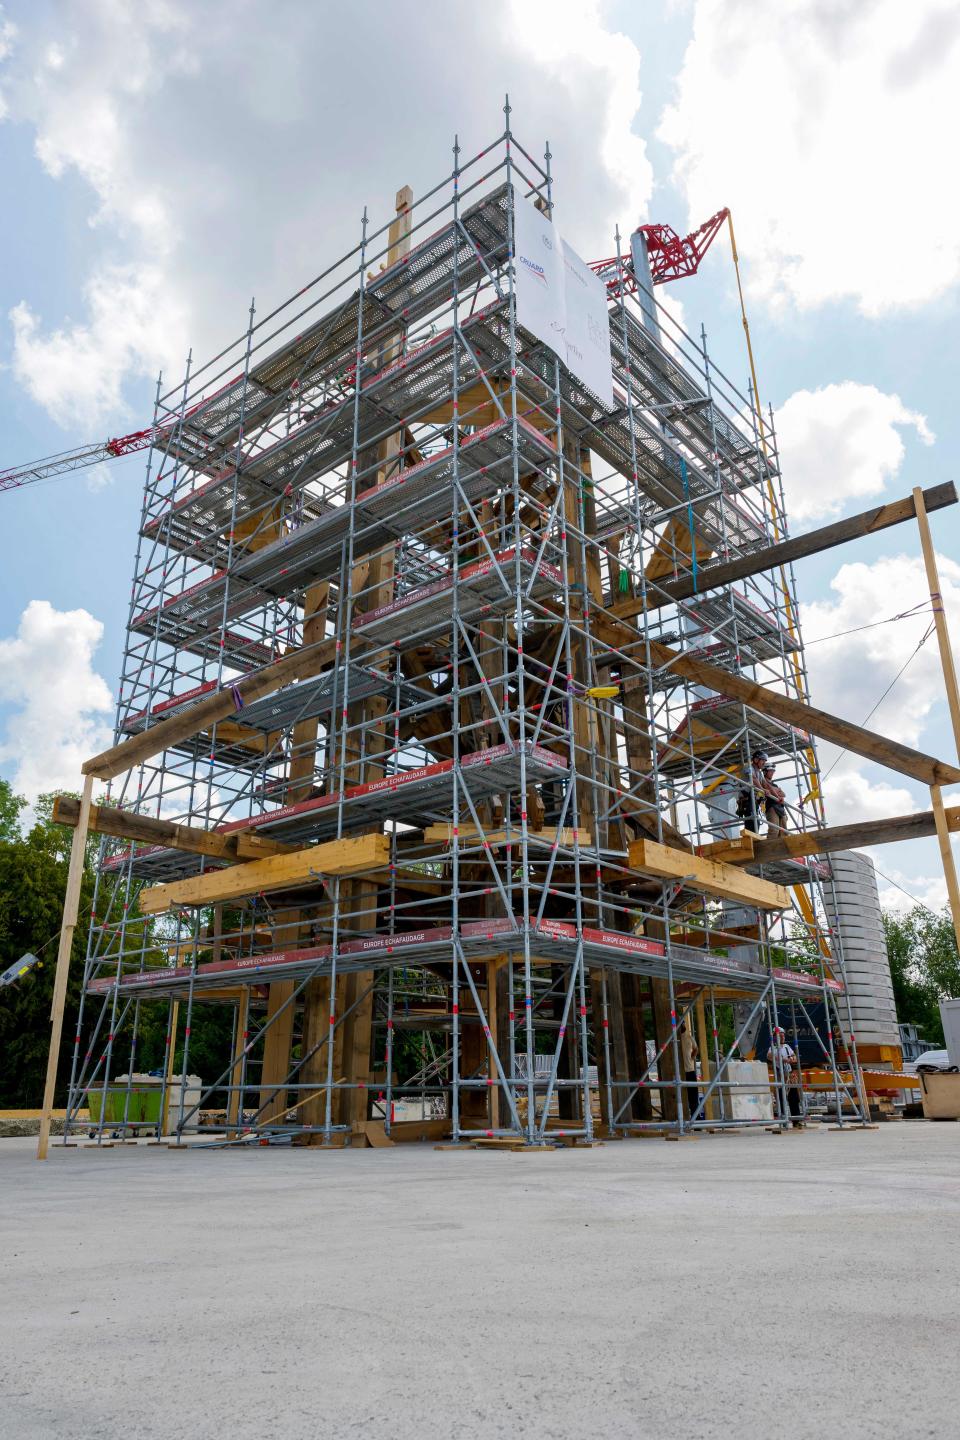 This photograph taken on July 20, 2023, shows the blank assembly of the new spire of the Notre-Dame de Paris cathedral in Briey, eastern France. This spire is being reconstructed to be identical to the original one, as after the fire of April 15, 2019, Notre-Dame is set to be reopened at the end of 2024 according to the French Minsitry of Culture. / Credit: JEAN-CHRISTOPHE VERHAEGEN/AFP via Getty Images